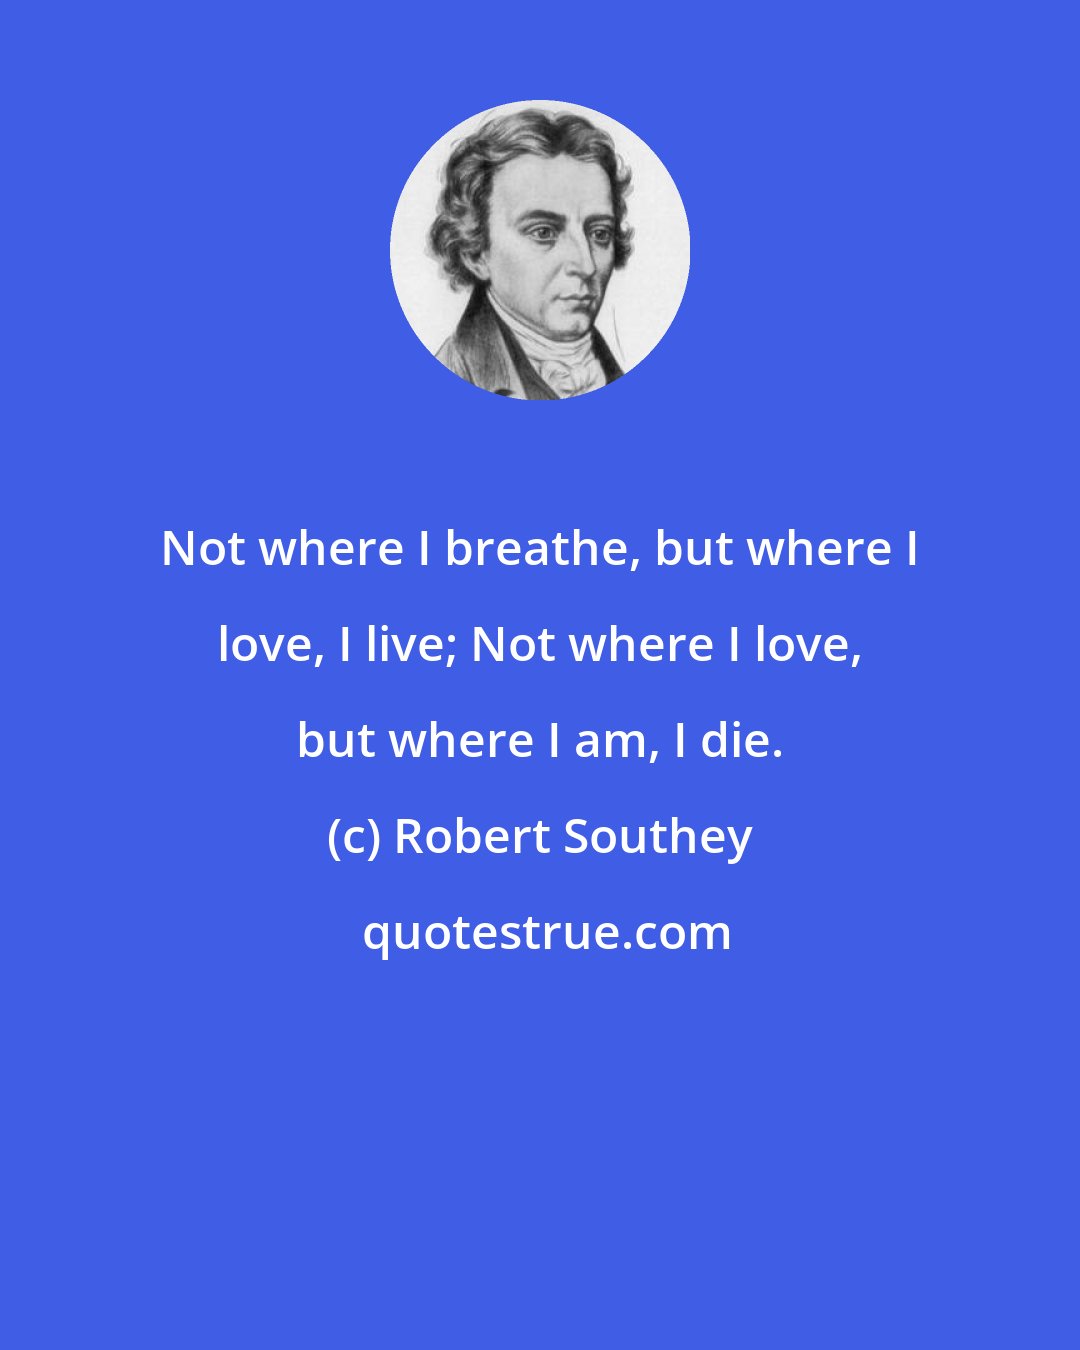 Robert Southey: Not where I breathe, but where I love, I live; Not where I love, but where I am, I die.